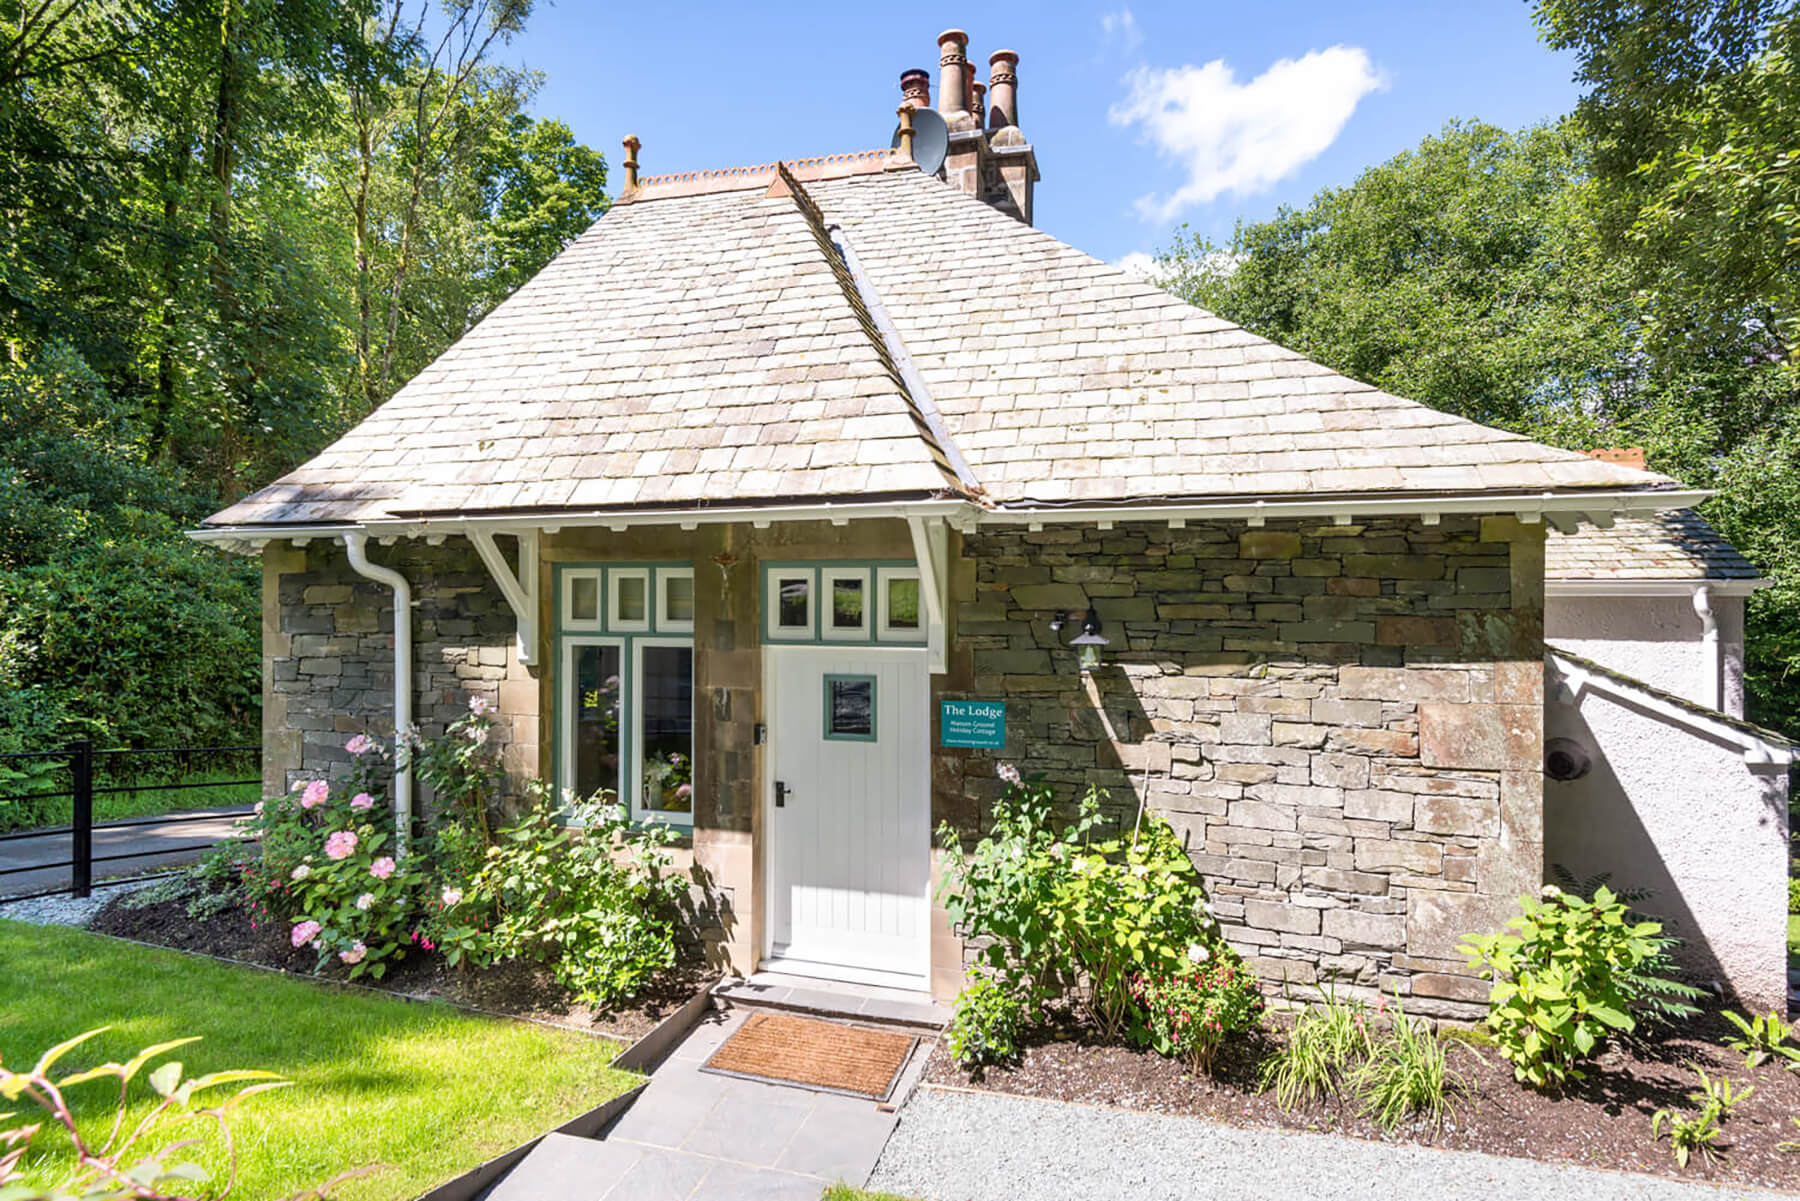 Lake District holiday cottages from Matson Ground.Matson Ground Lodge, Windermere